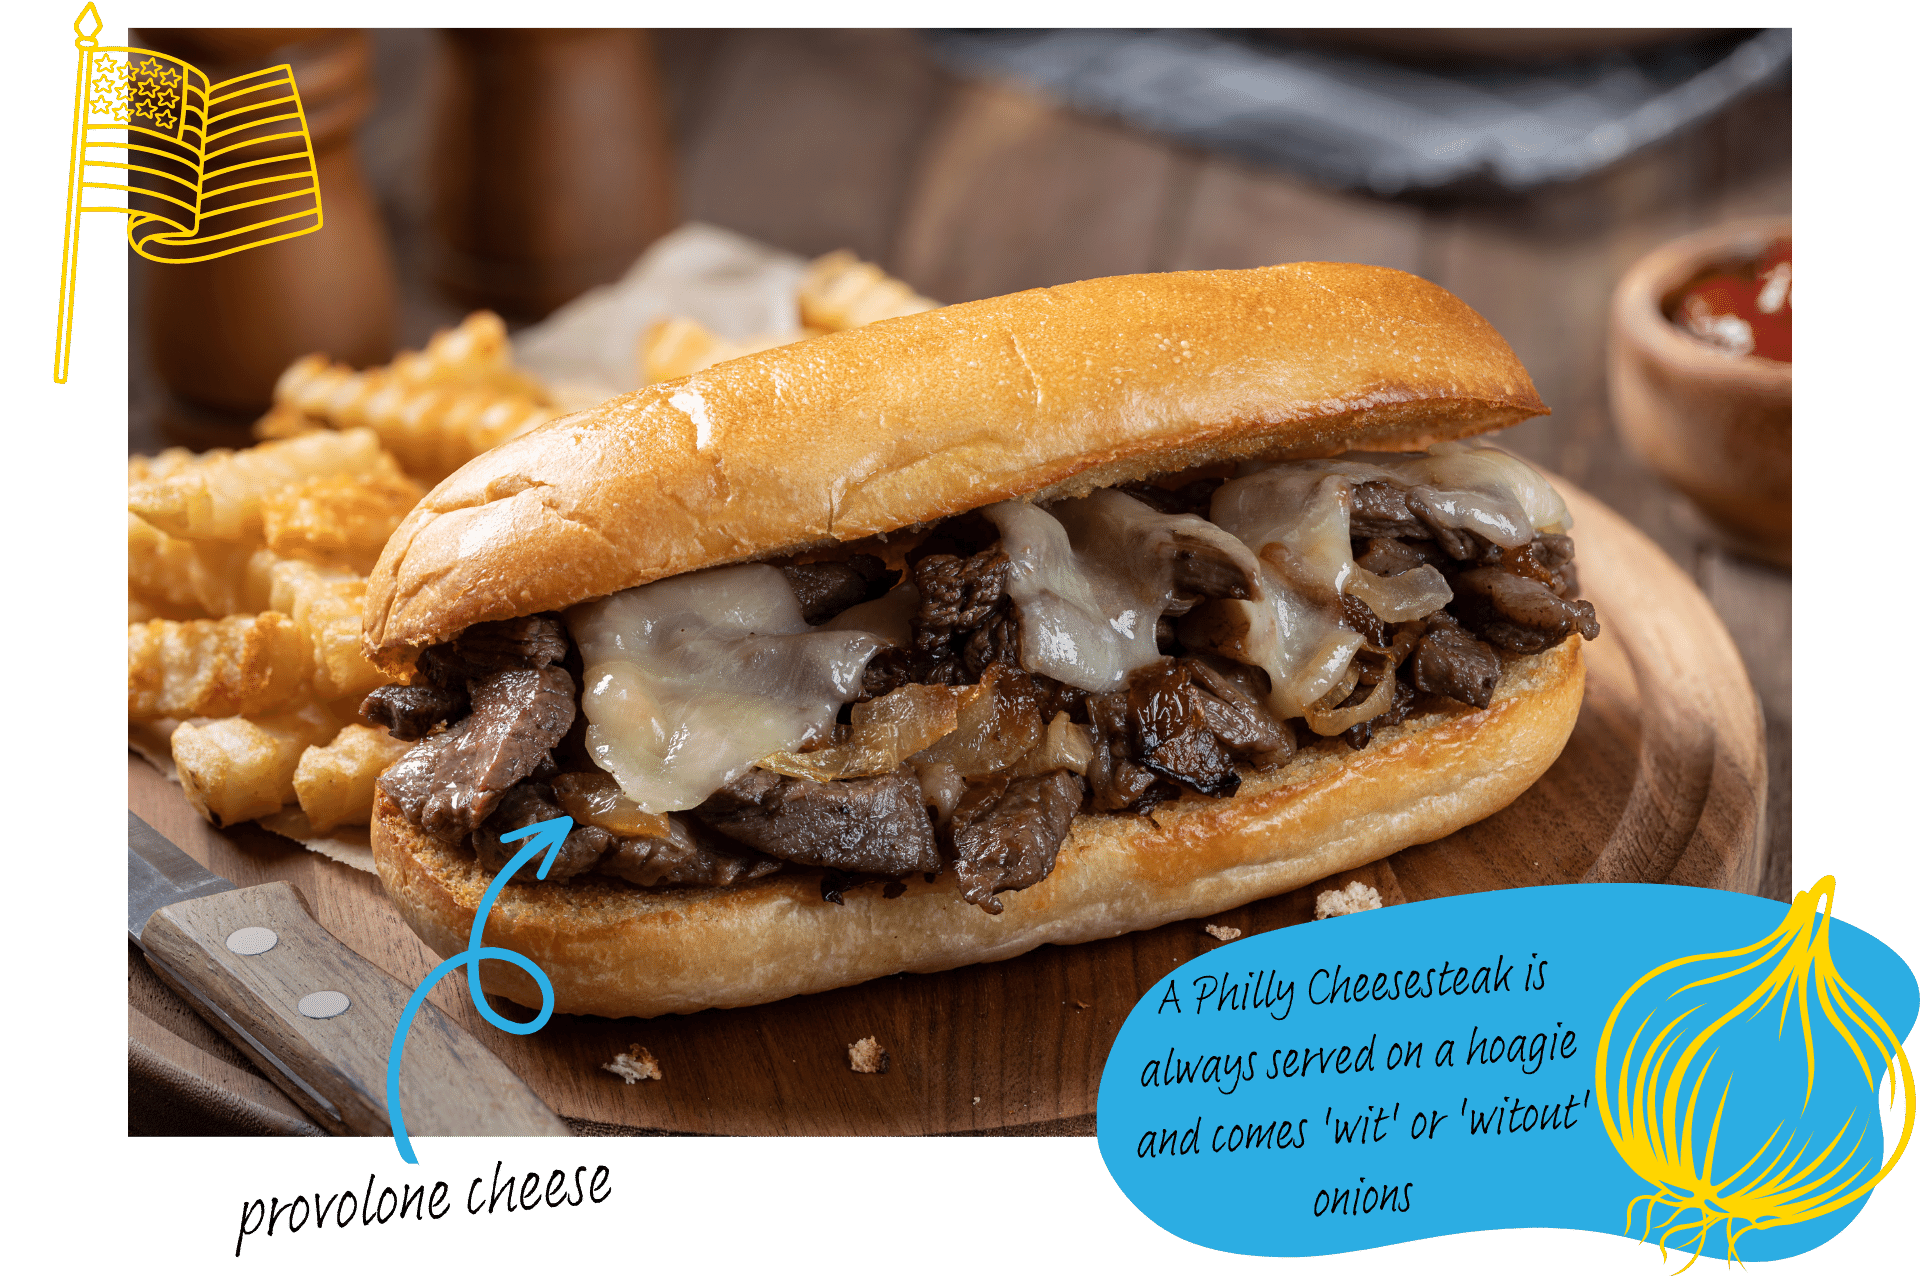 An image of a Philly Cheesesteak sandwich, an iconic sandwich from Philadelphia and one of the best sandwiches in the world.